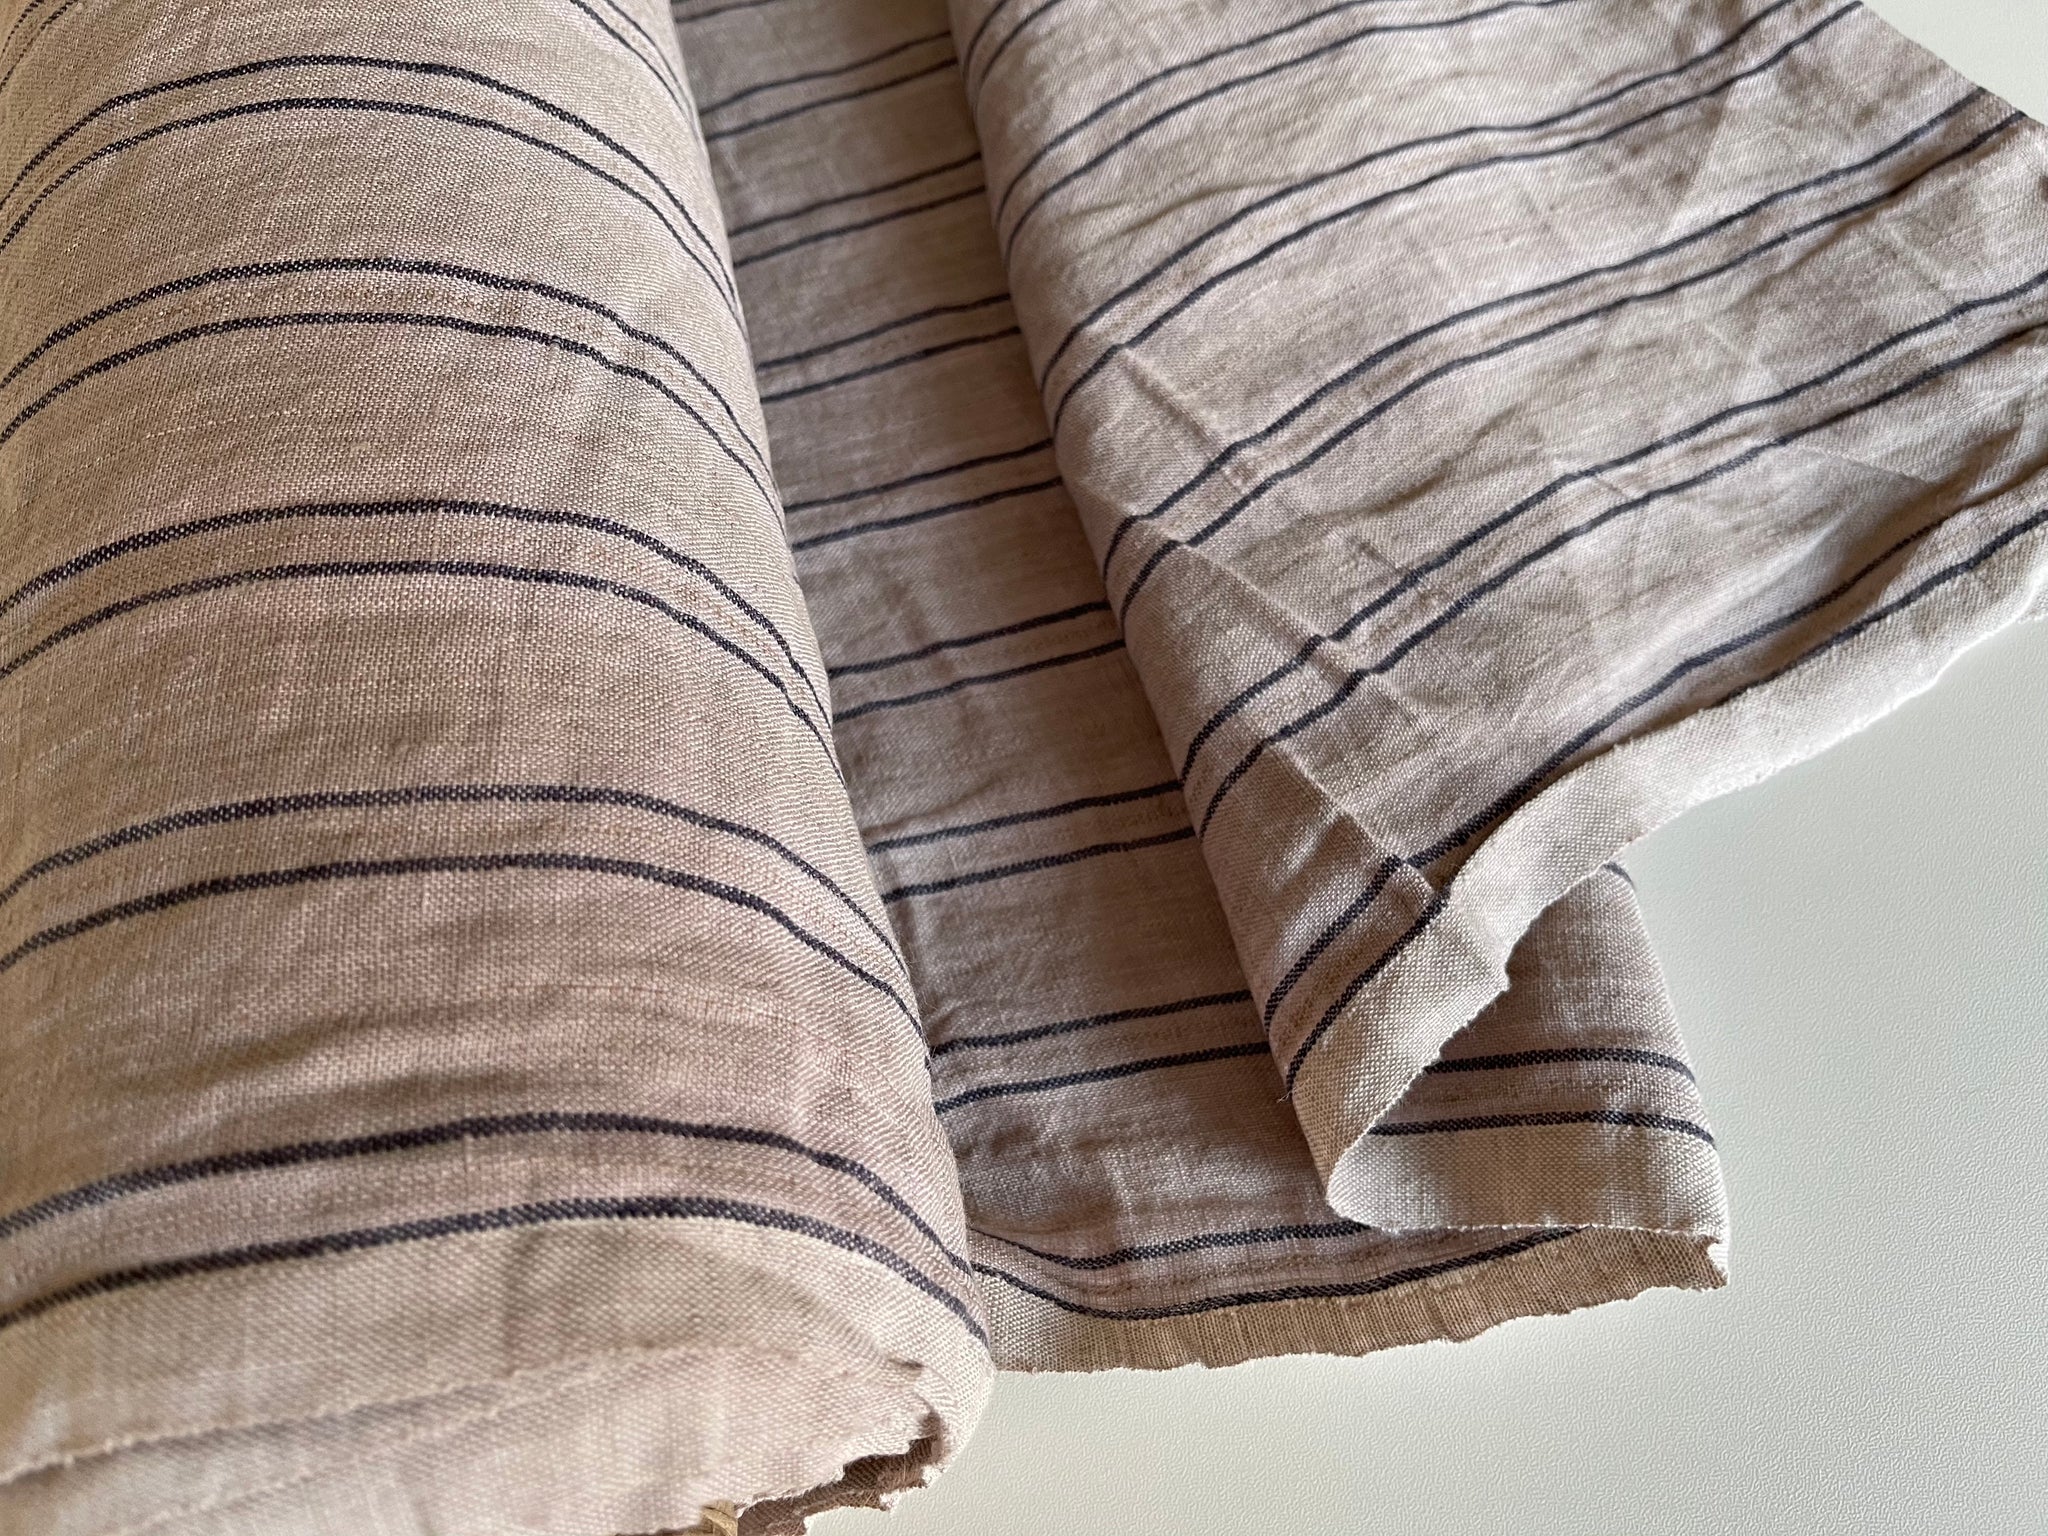 Mocca Stripes Linen Fabric - Stone Washed Super Soft